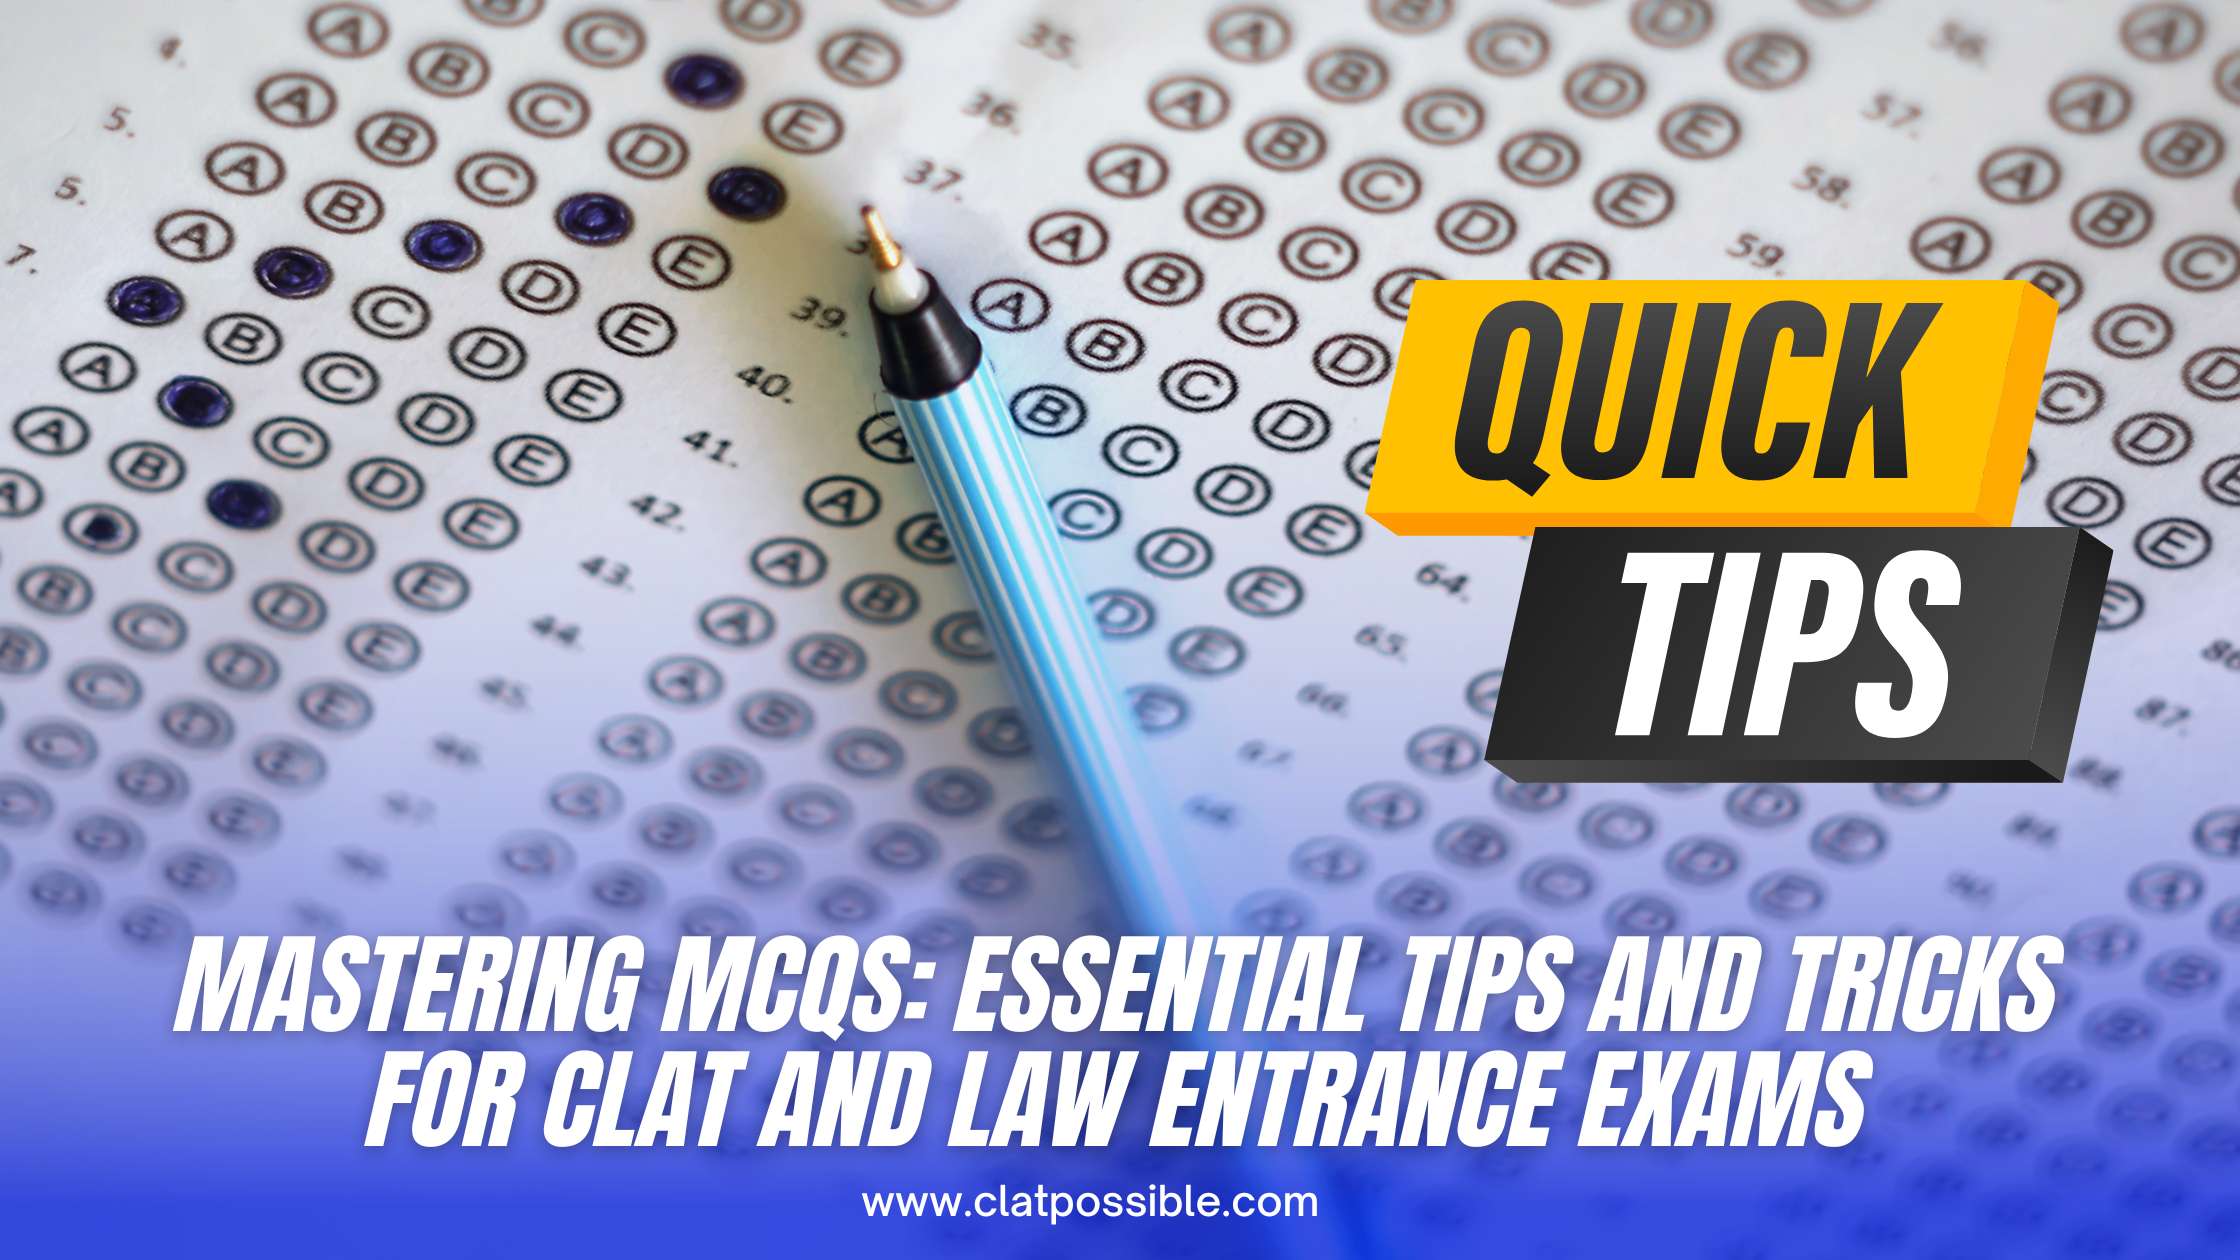 Mastering MCQs: Essential Tips and Tricks for CLAT and Law Entrance Exams